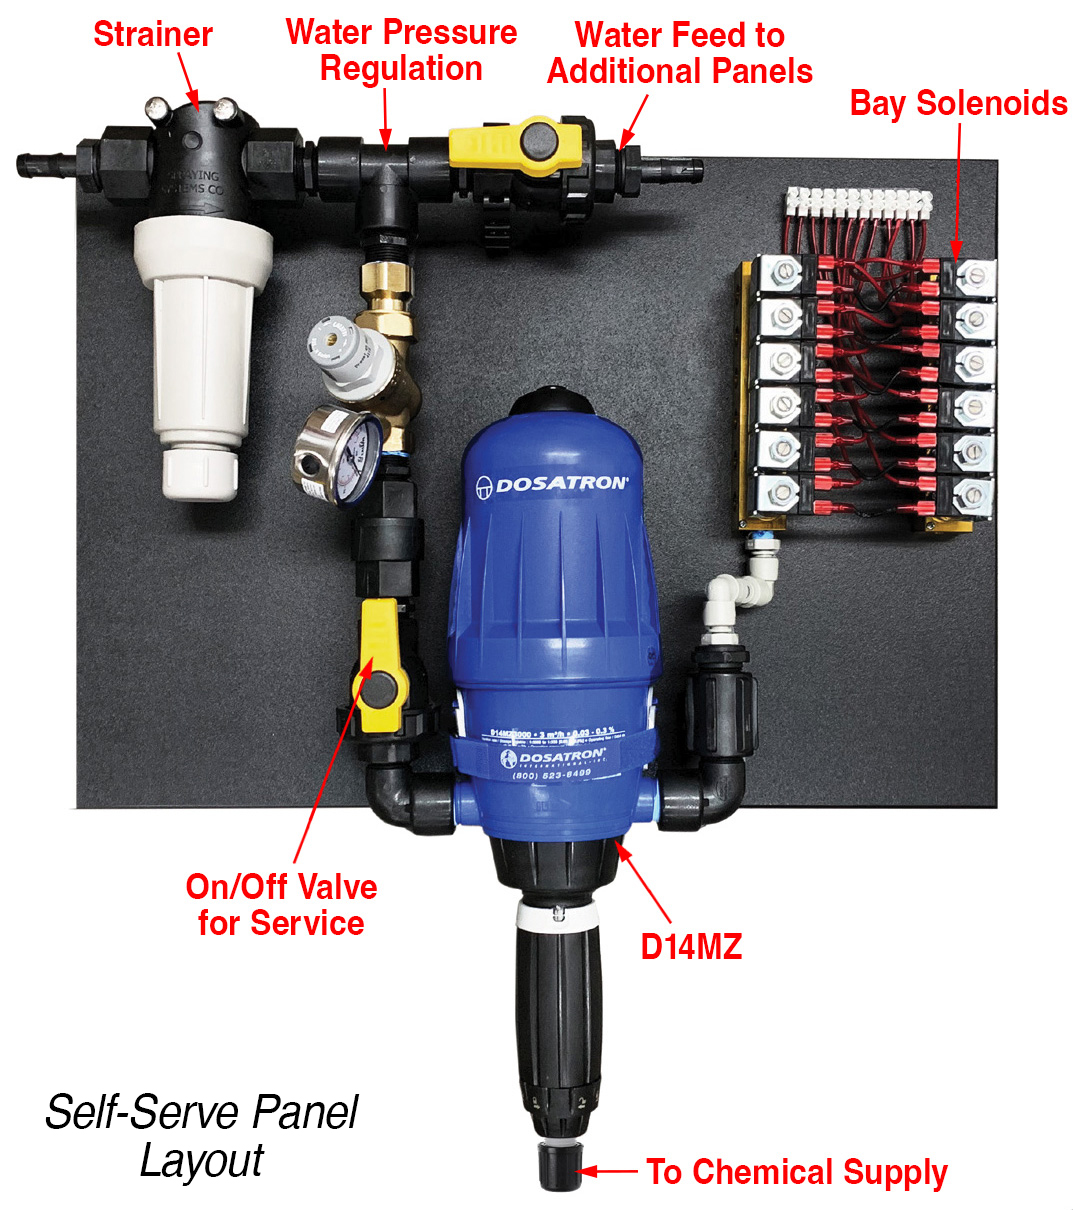 Picture of Chemical Mix and Dispenser System, Water Driven, Self-Serve Panel, 2 Bay Solenoids, 50:1 to 500:1, 24 Volt